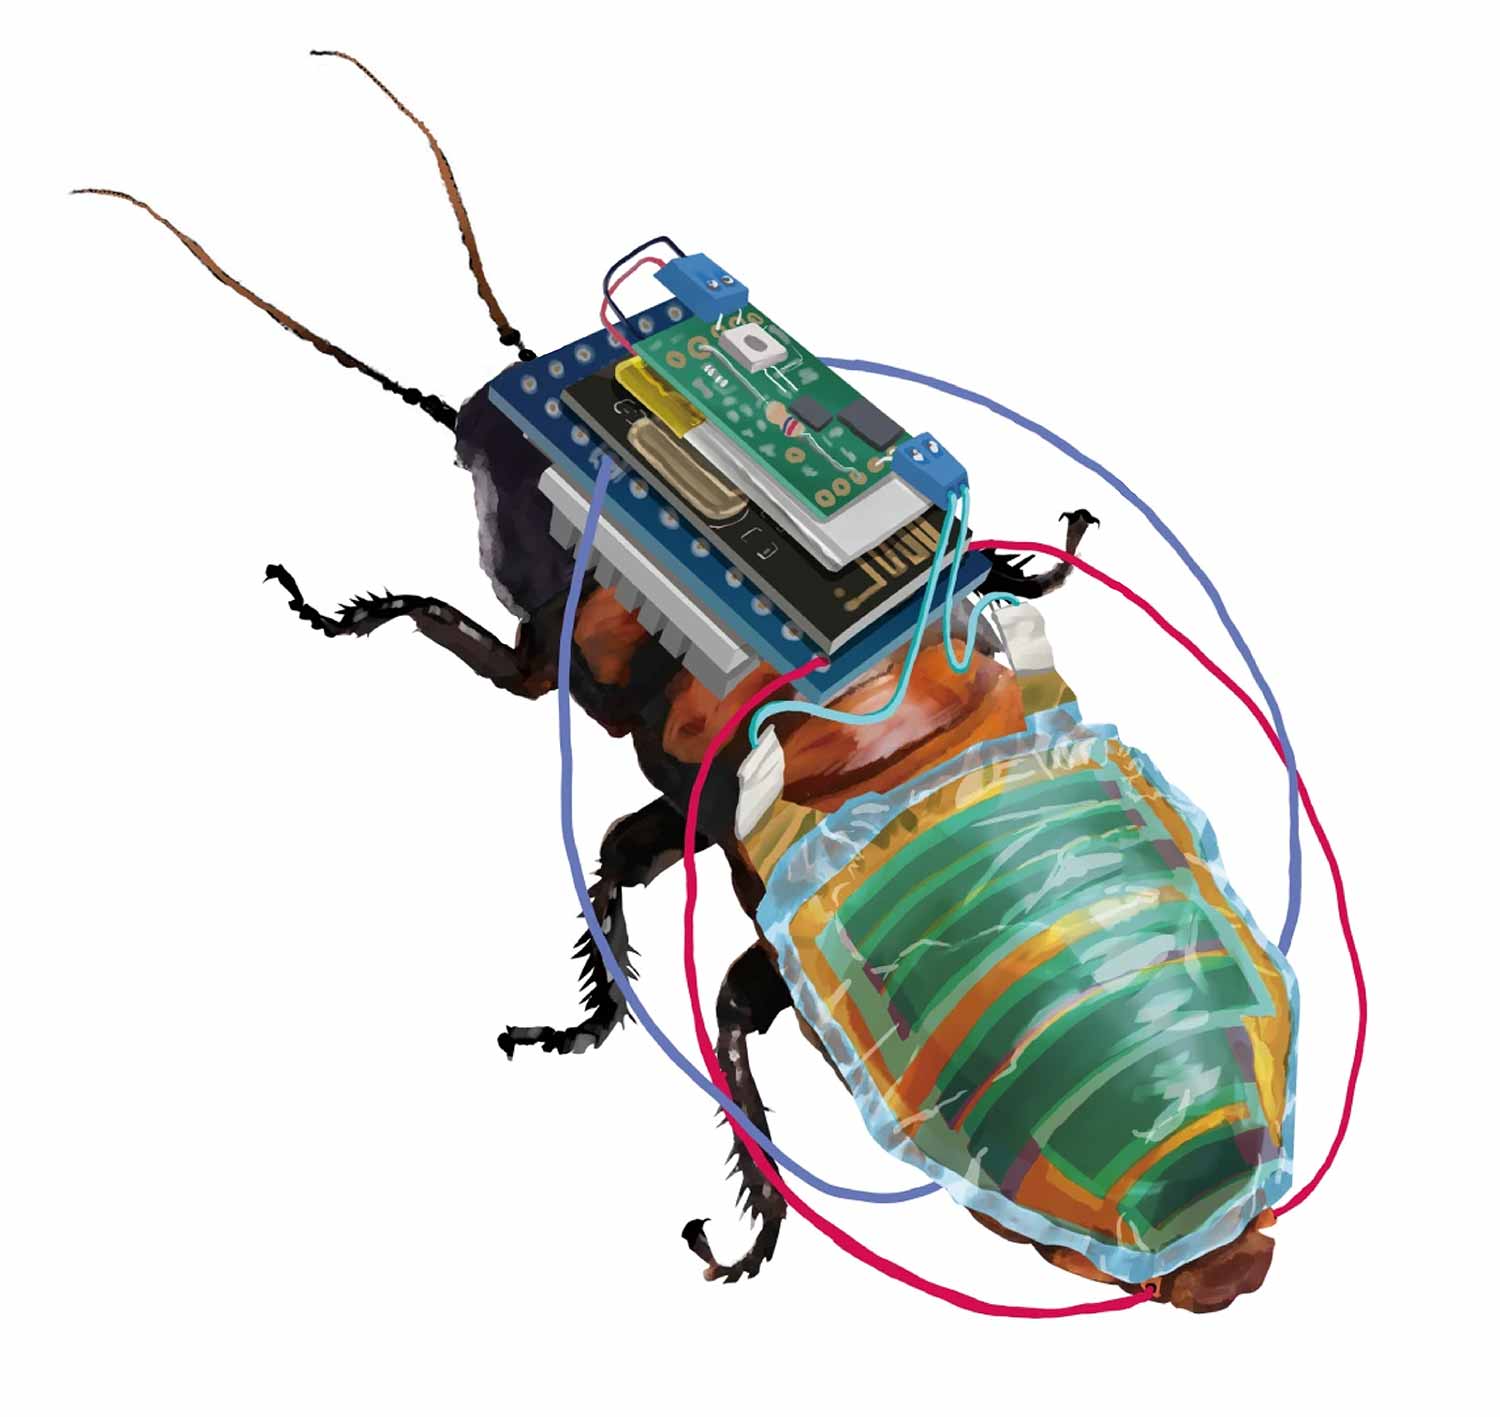 An illustration of a Madagascar hissing cockroach with thin panels, wires, and circuitry attached to its body